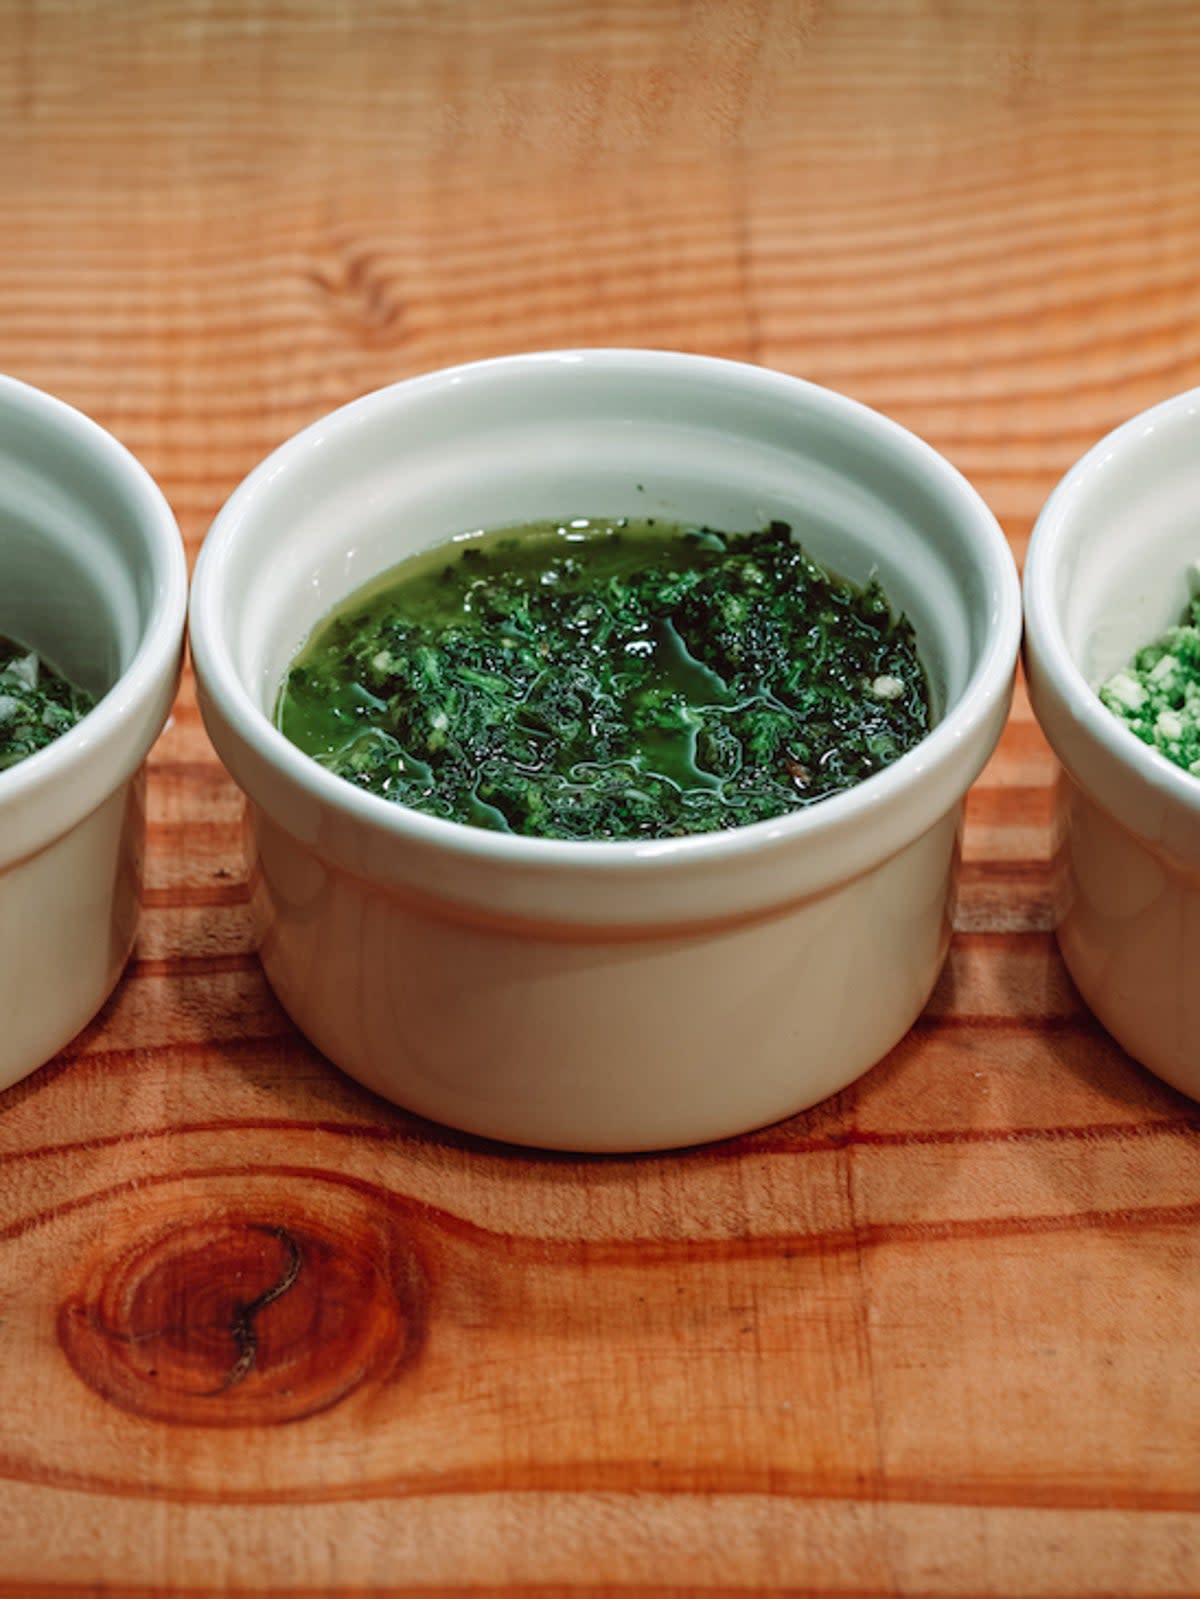 Give grilled meat and fish a bold punch of flavour with this chickweed chimichurri (Tiffany Bader)